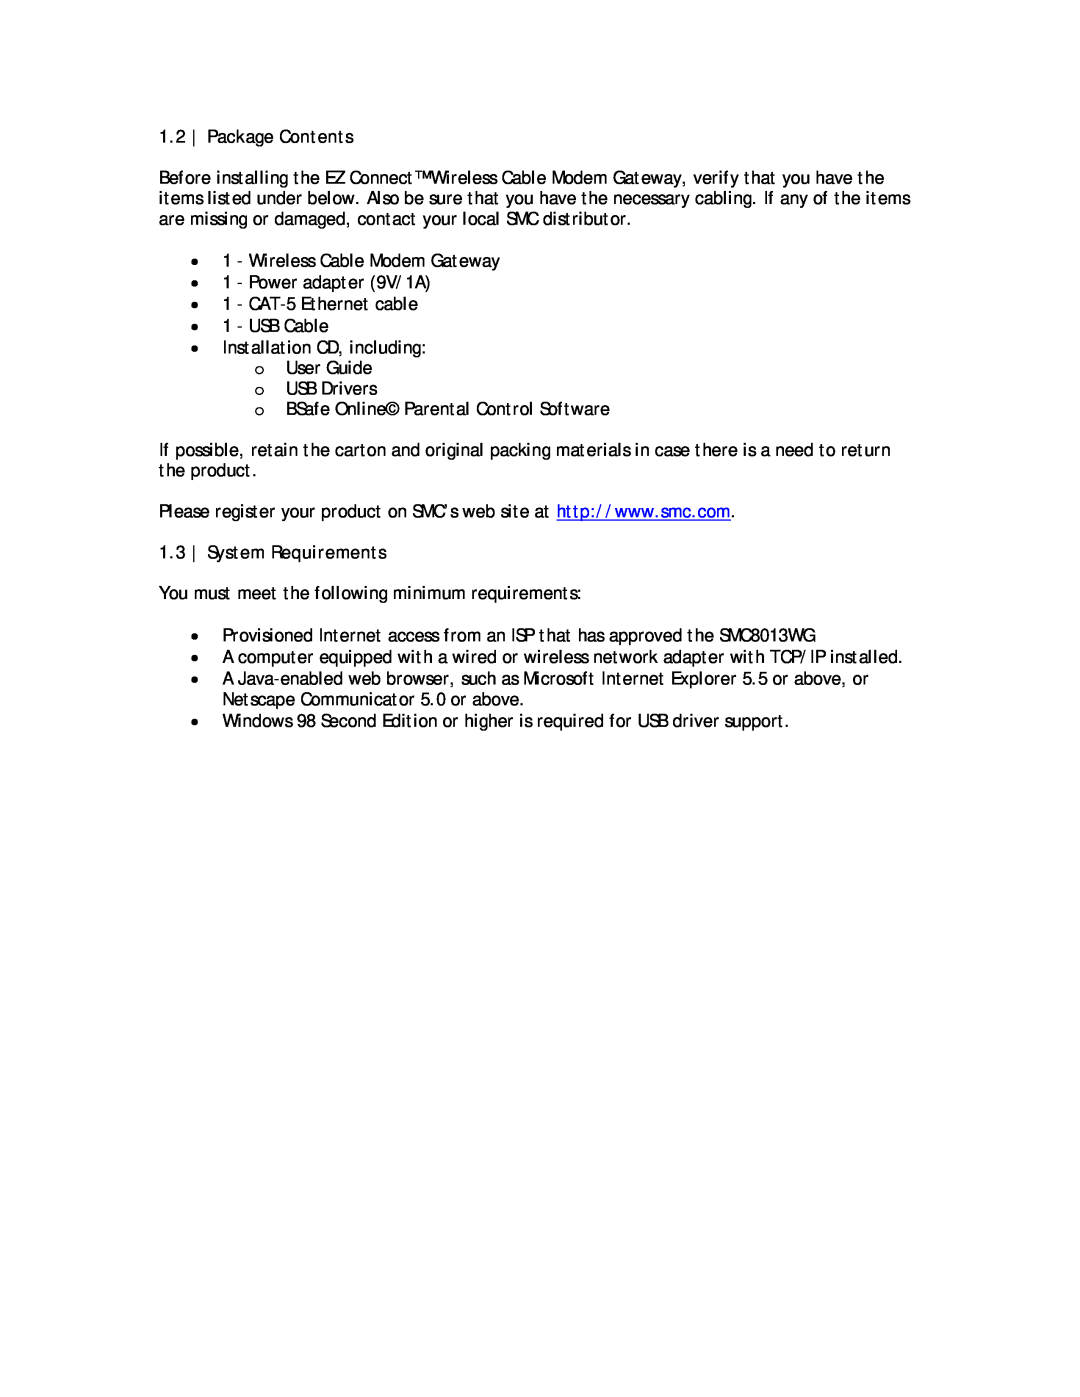 SMC Networks SMC8013WG manual Package Contents, System Requirements 